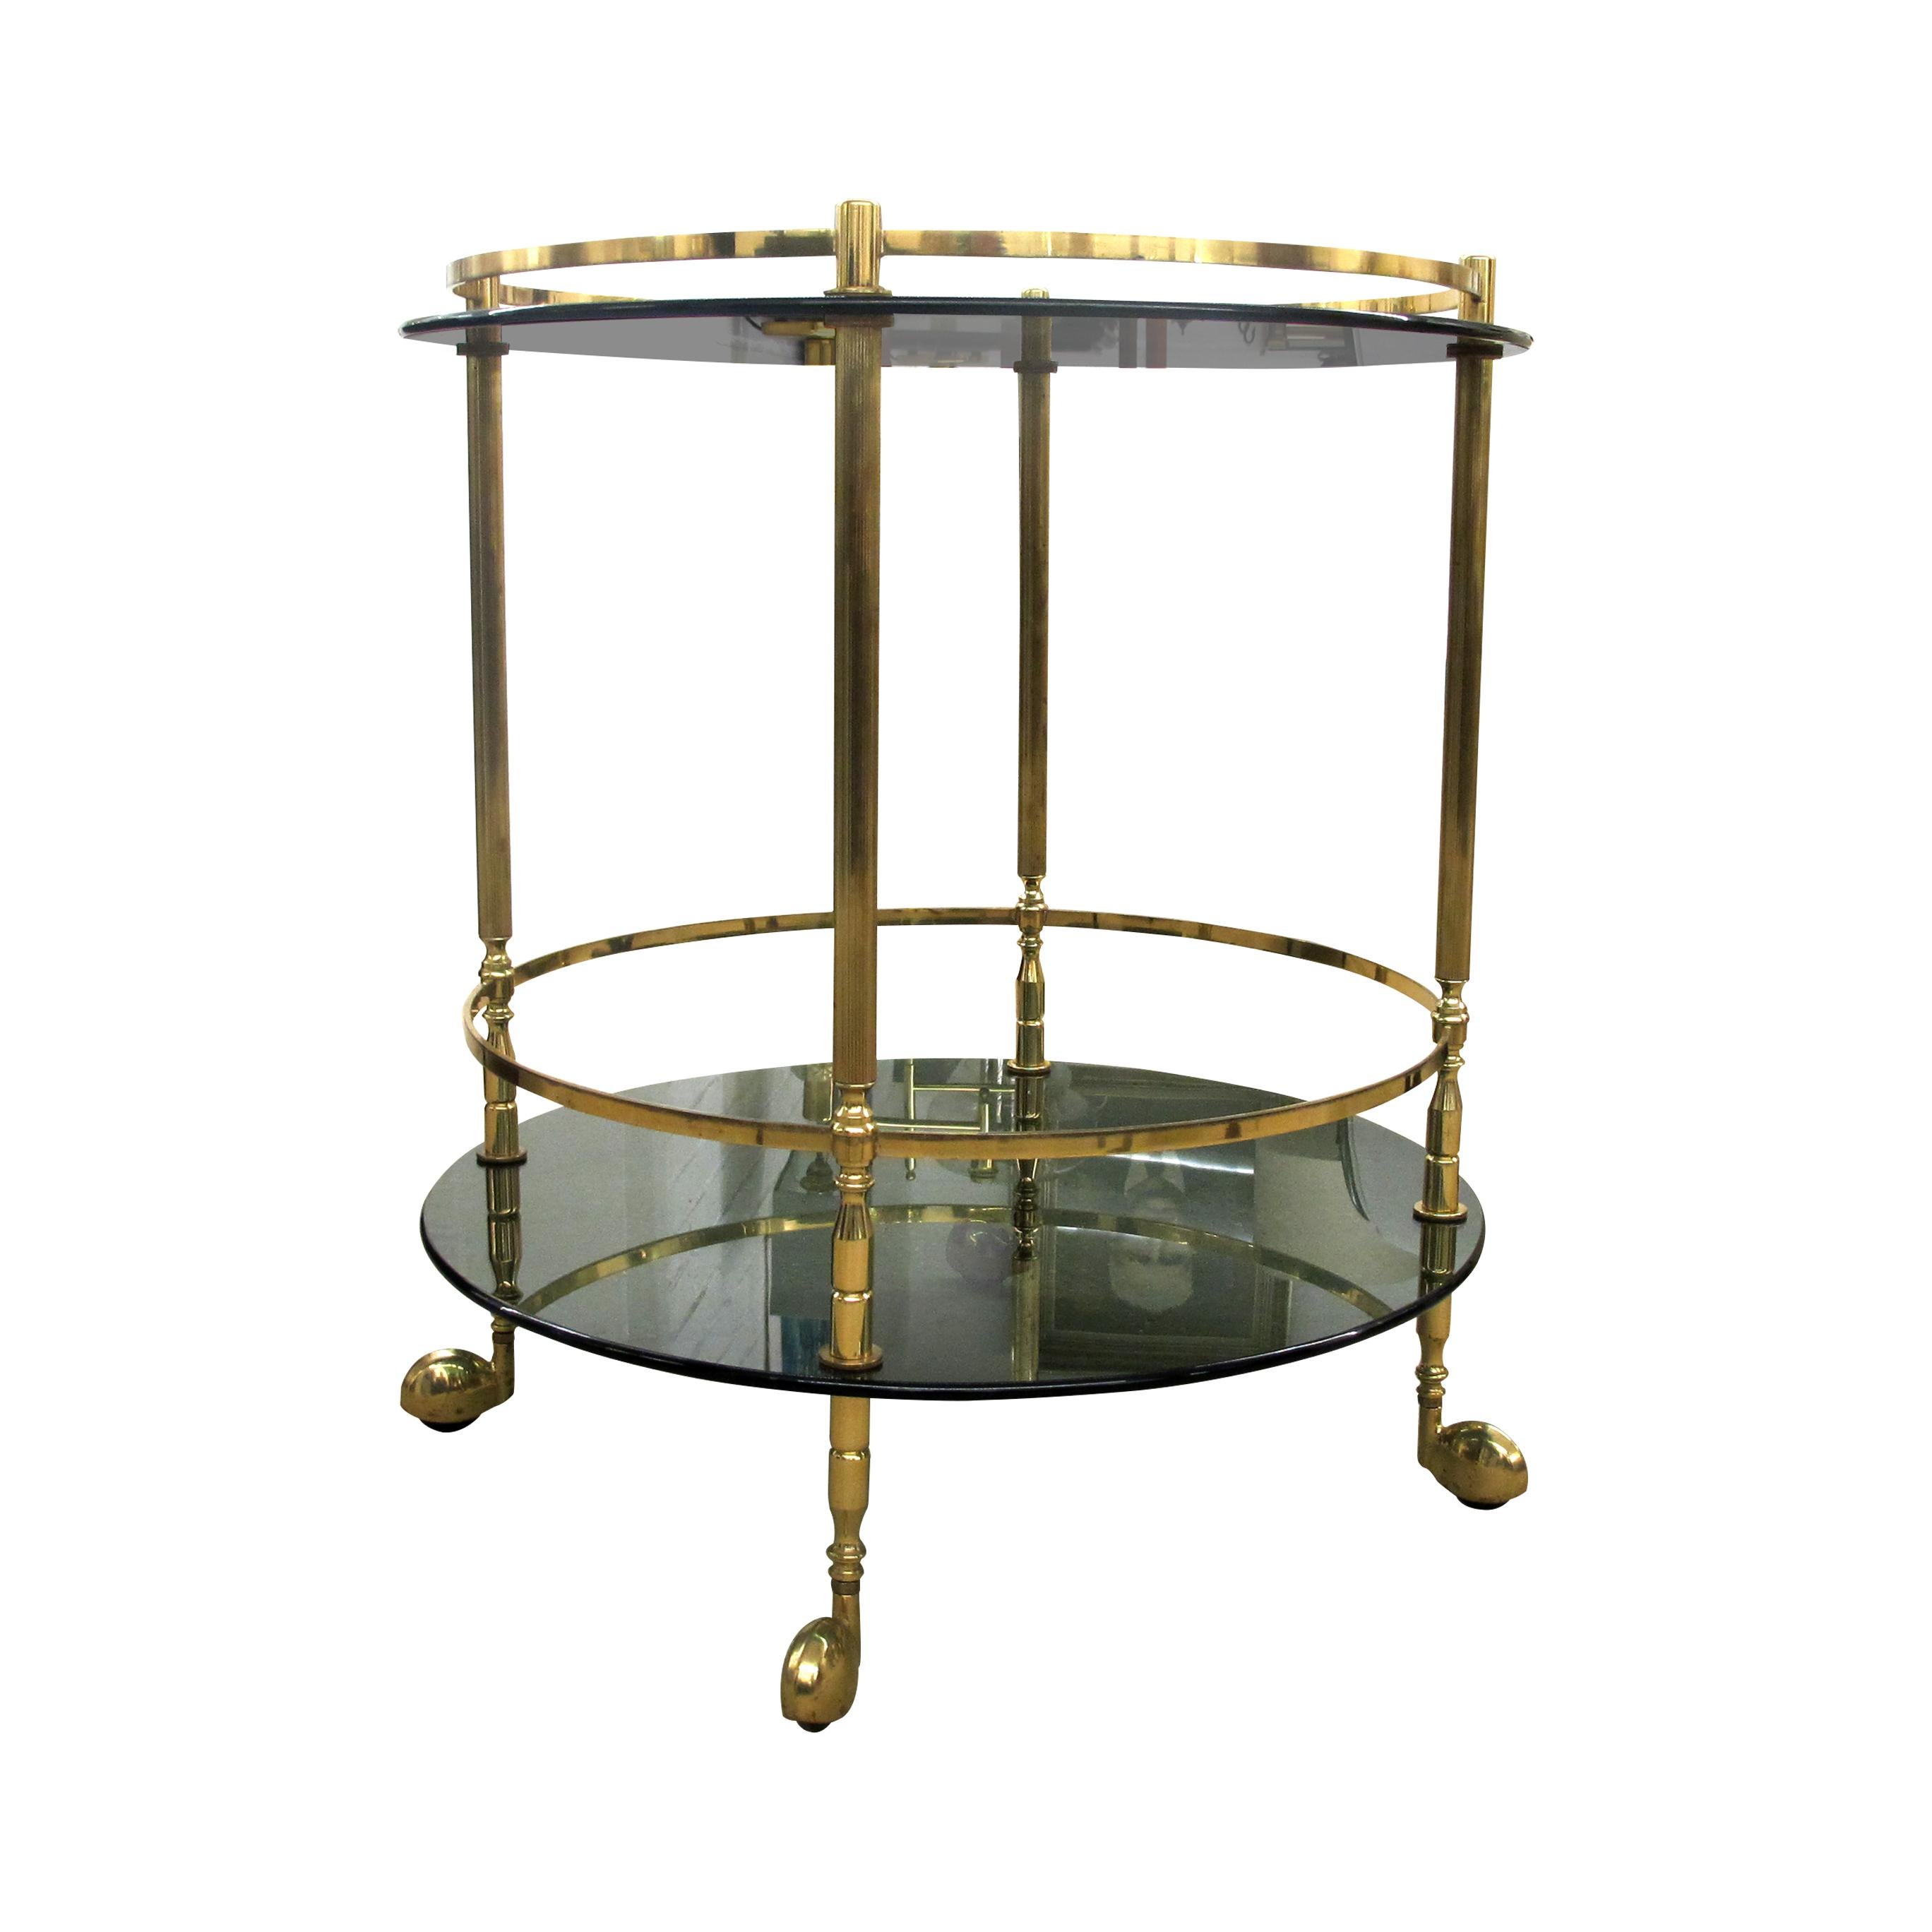 Elegant 1960s Italian two-tier round trolley with its original smoked glass. The bar cart is mounted on 4 brass castors and wheel very well. The trolley is functional and its sleek design will blend in with most of the interiors. 

Size: H69 cm x